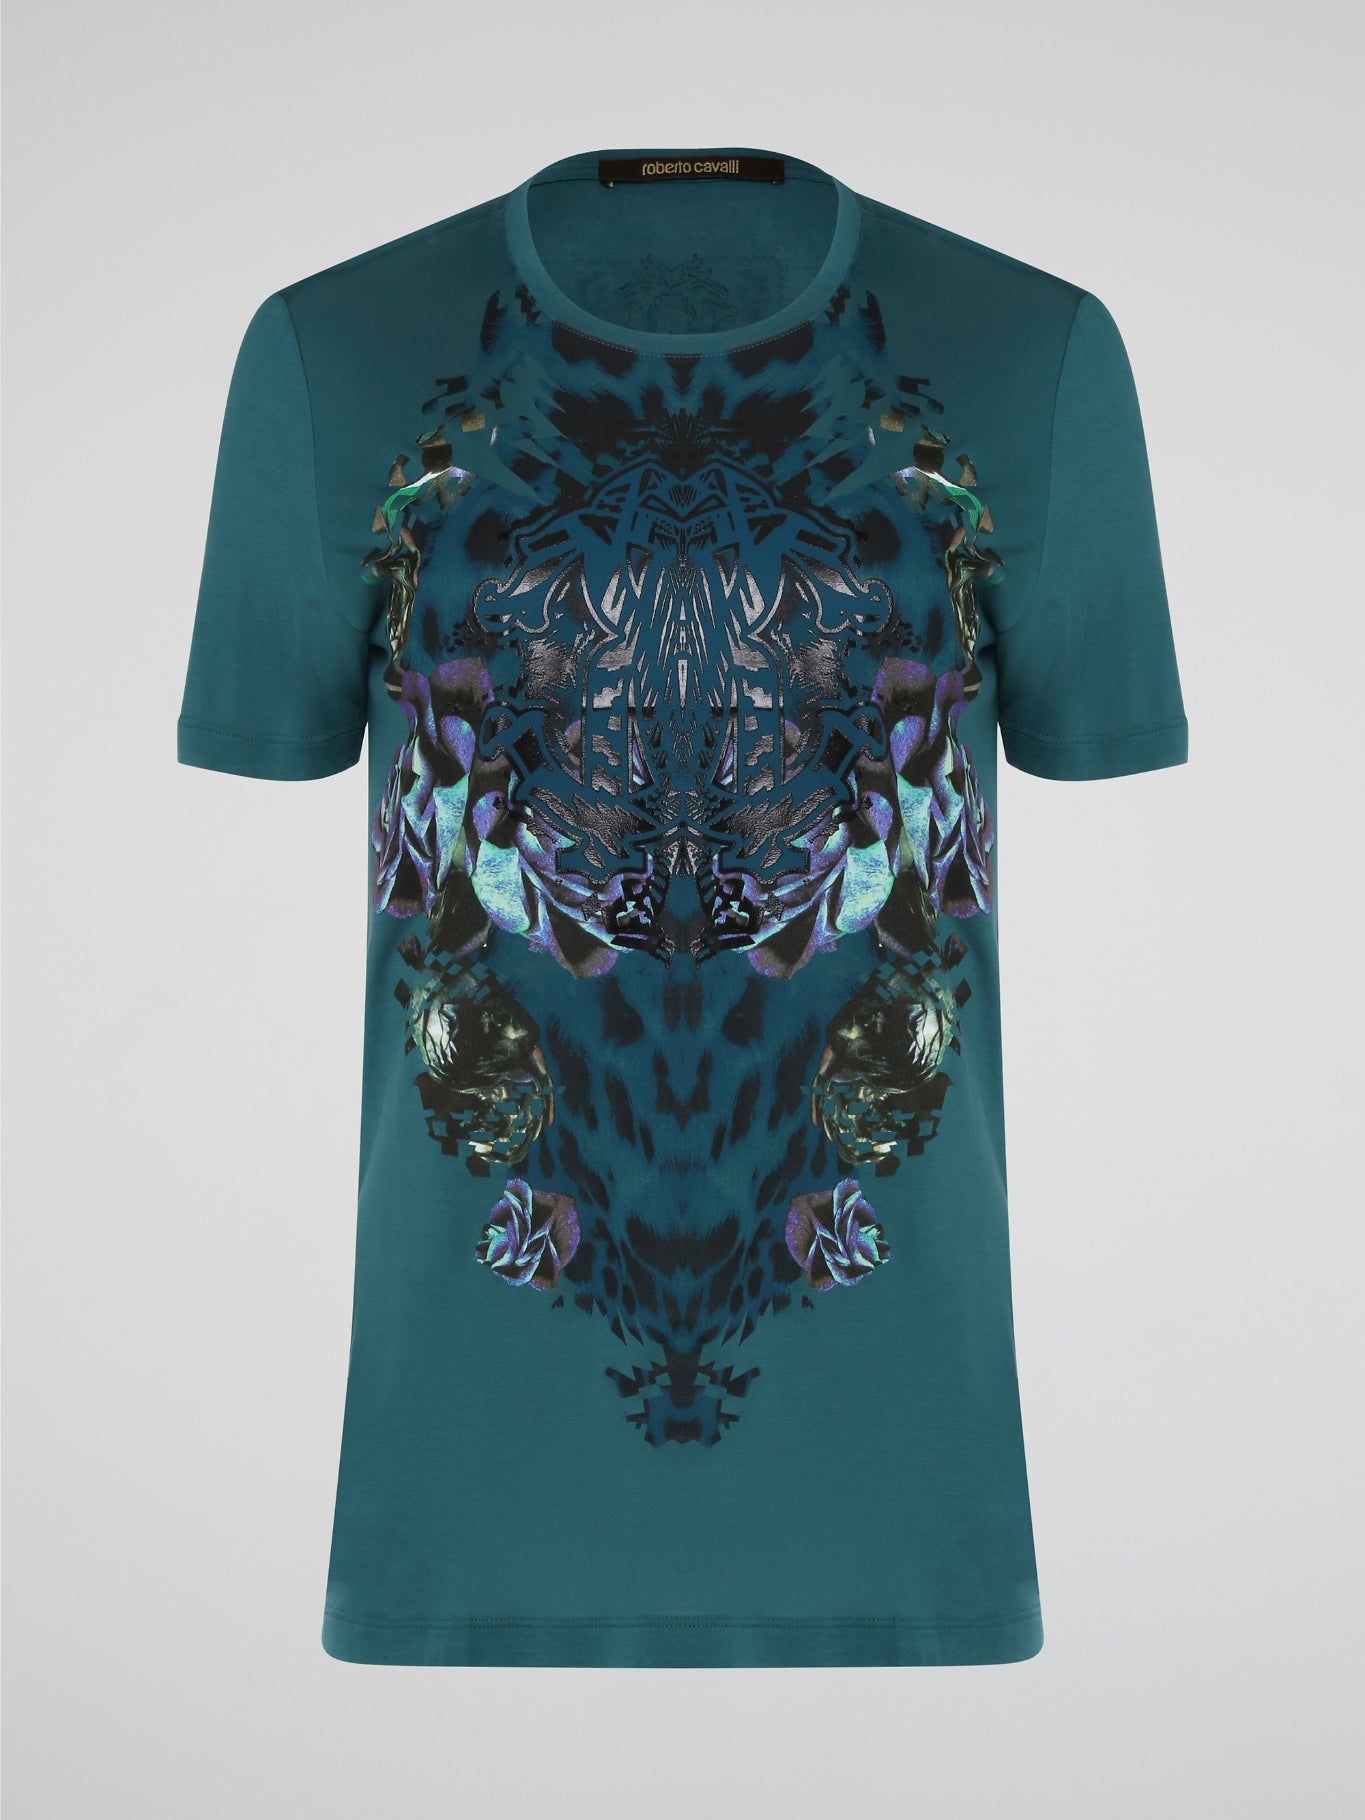 Elevate your casual style with the Green Printed T-Shirt from Roberto Cavalli, featuring a bold and eye-catching design that is sure to turn heads. Crafted from high-quality materials, this shirt offers both comfort and sophistication, making it the perfect addition to any fashion-forward wardrobe. Whether paired with jeans for a laid-back look or dressed up with a blazer for a night out, this t-shirt is a versatile and trendy choice for any occasion.